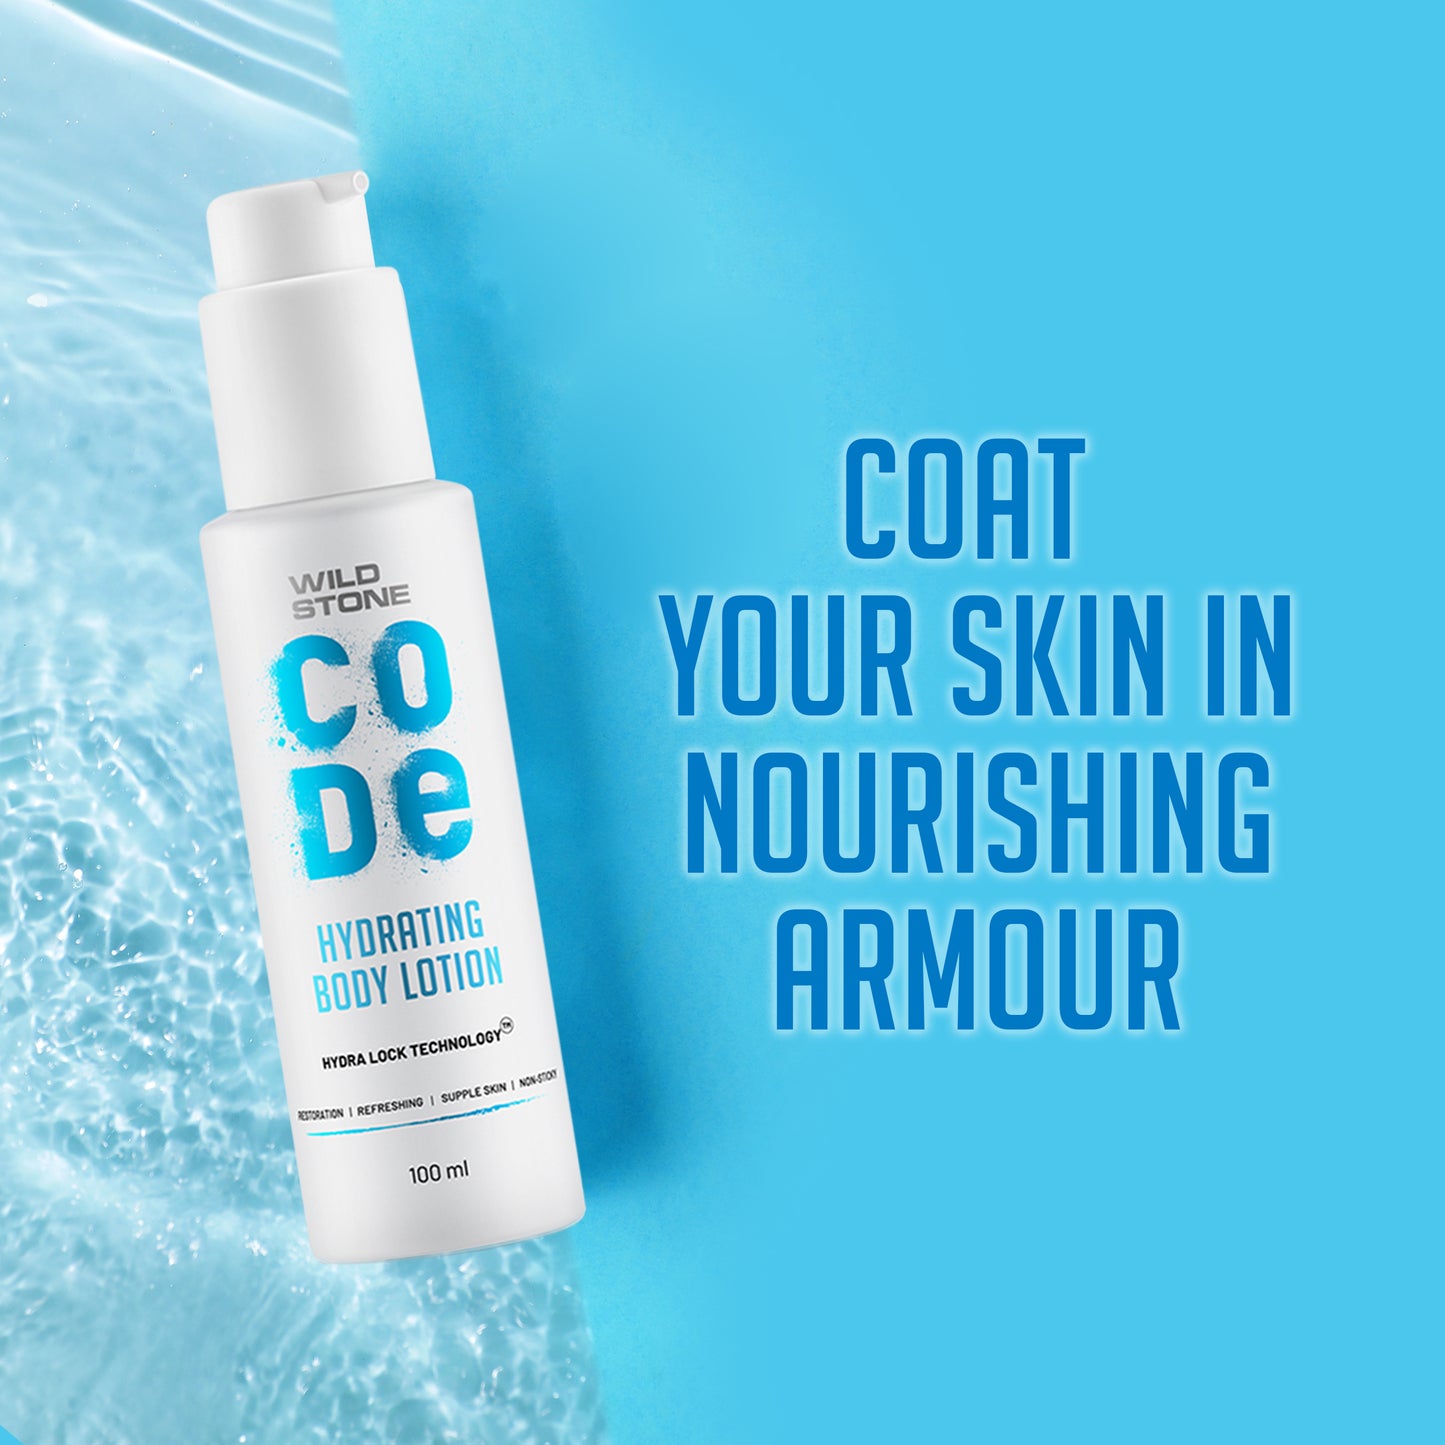 CODE hydrating body lotion for men